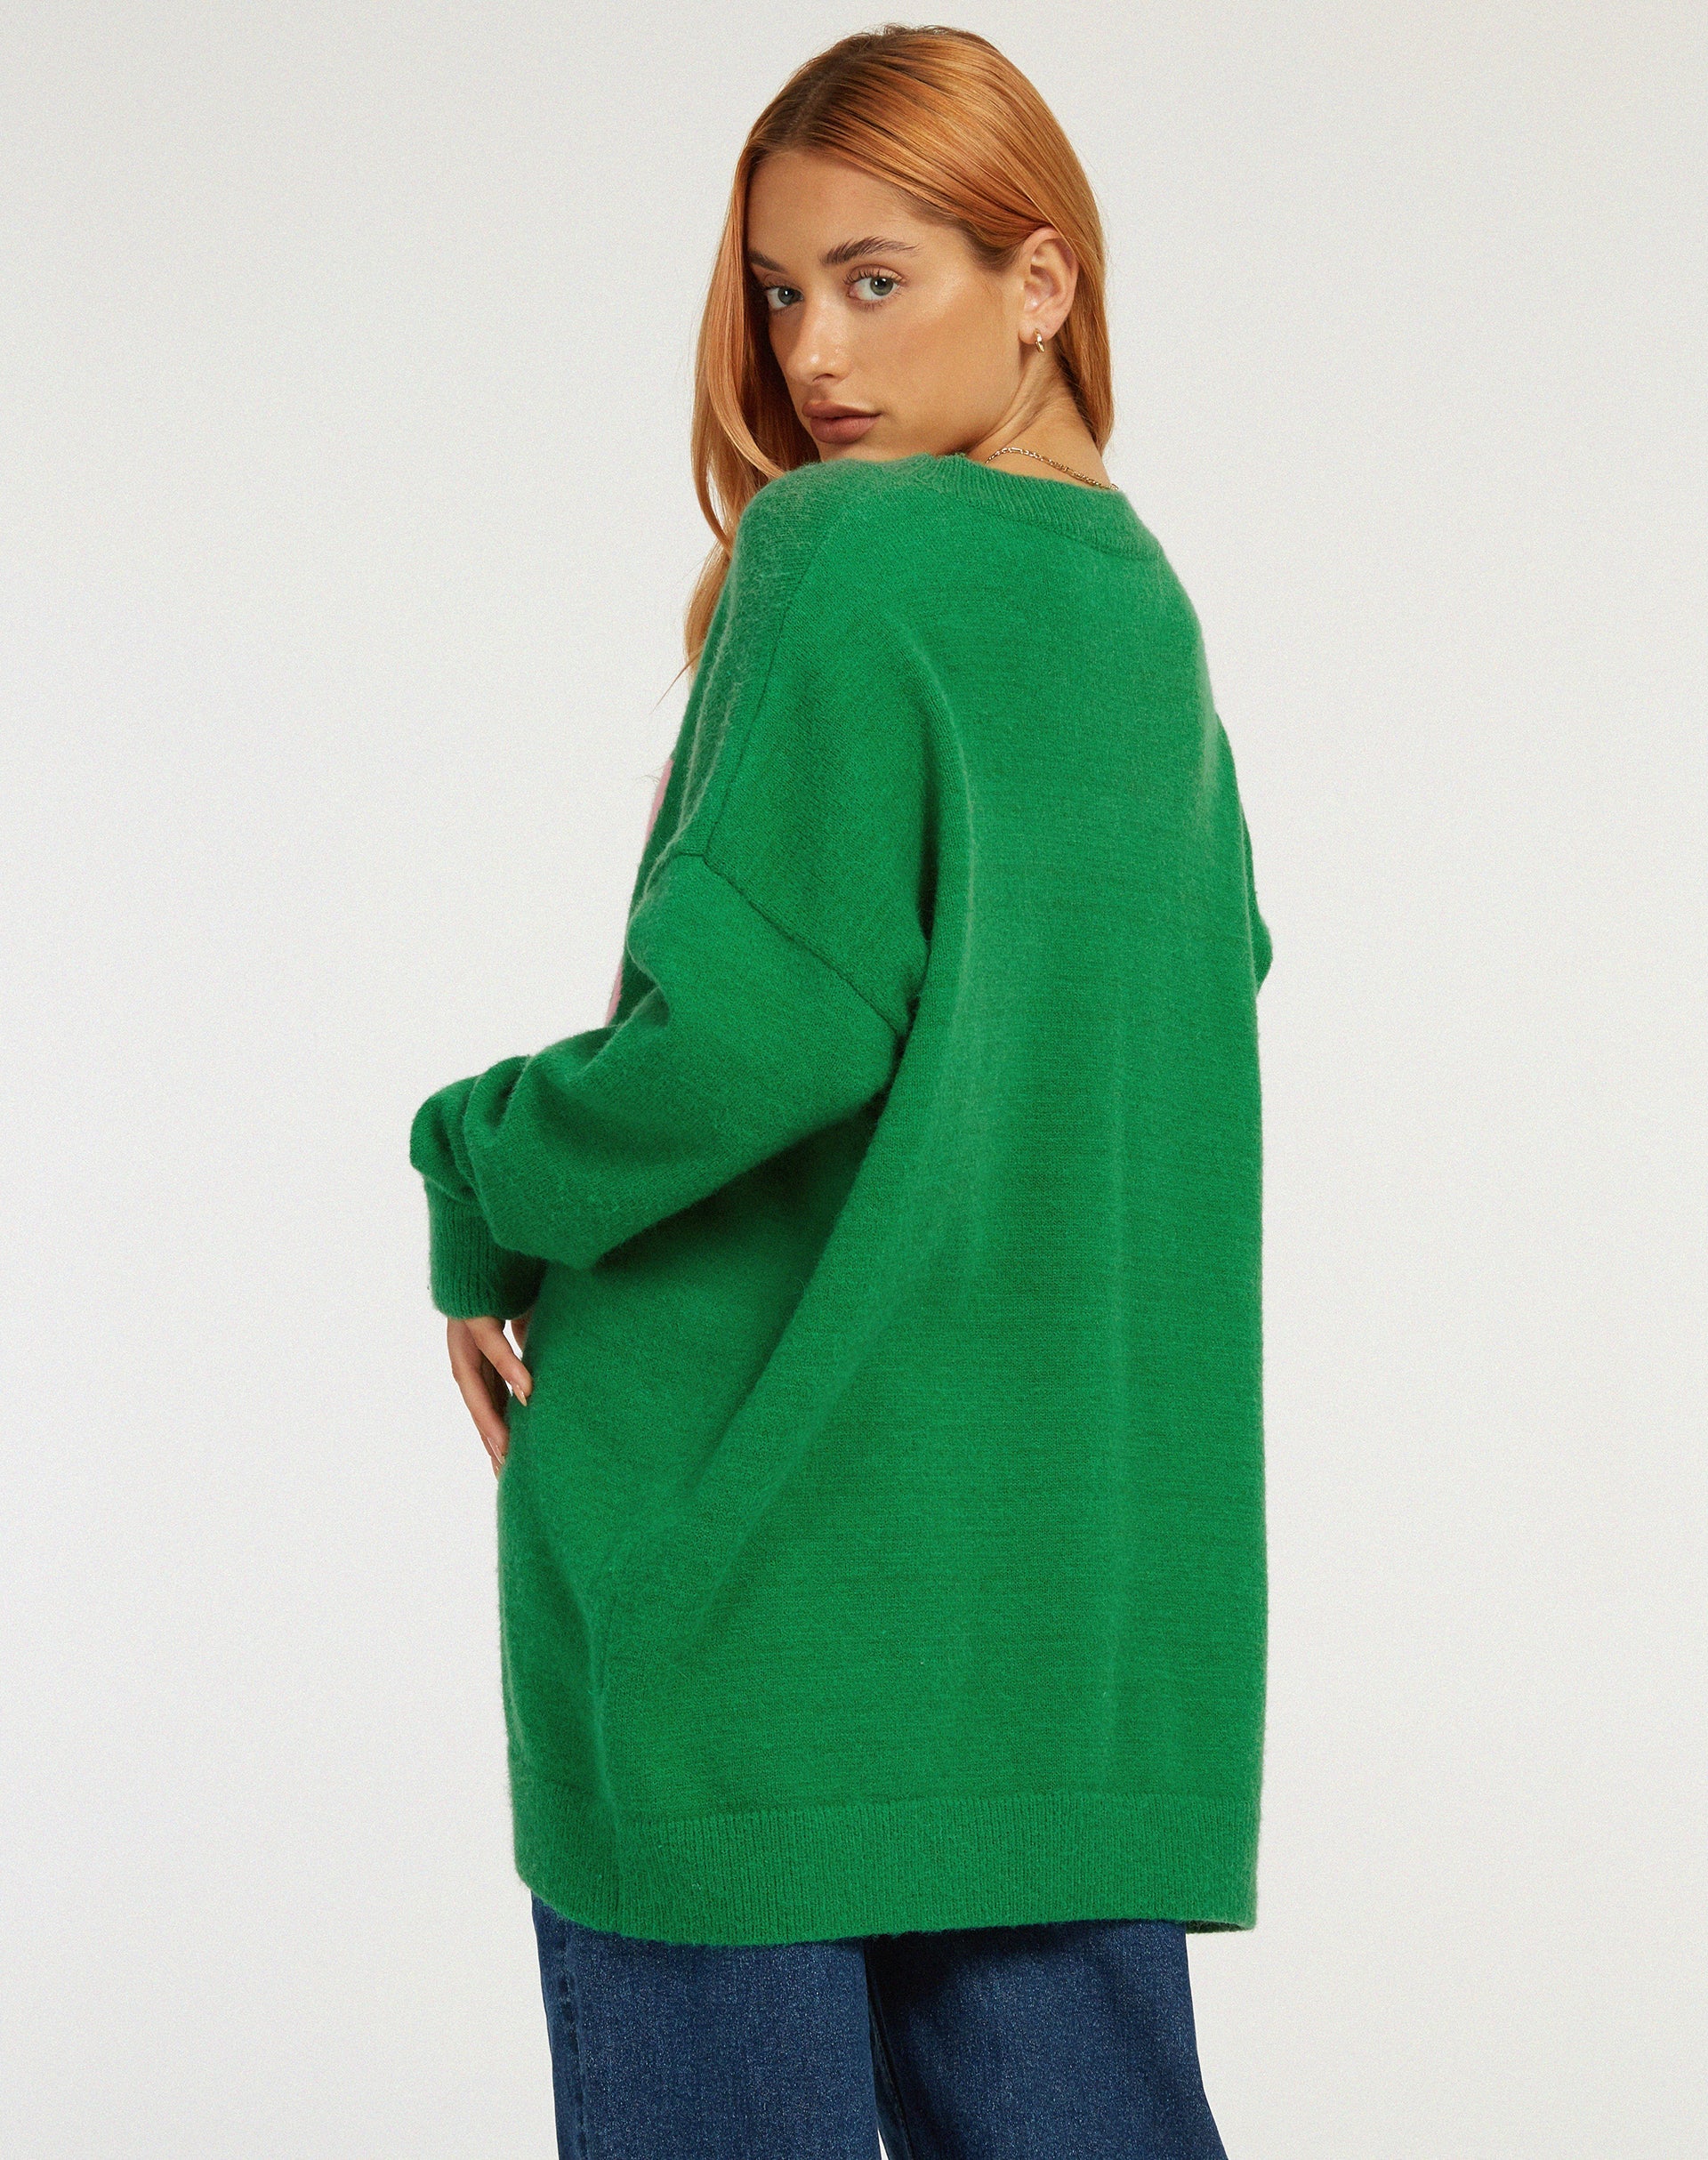 GREEN PINKY PROMISE SWEATER